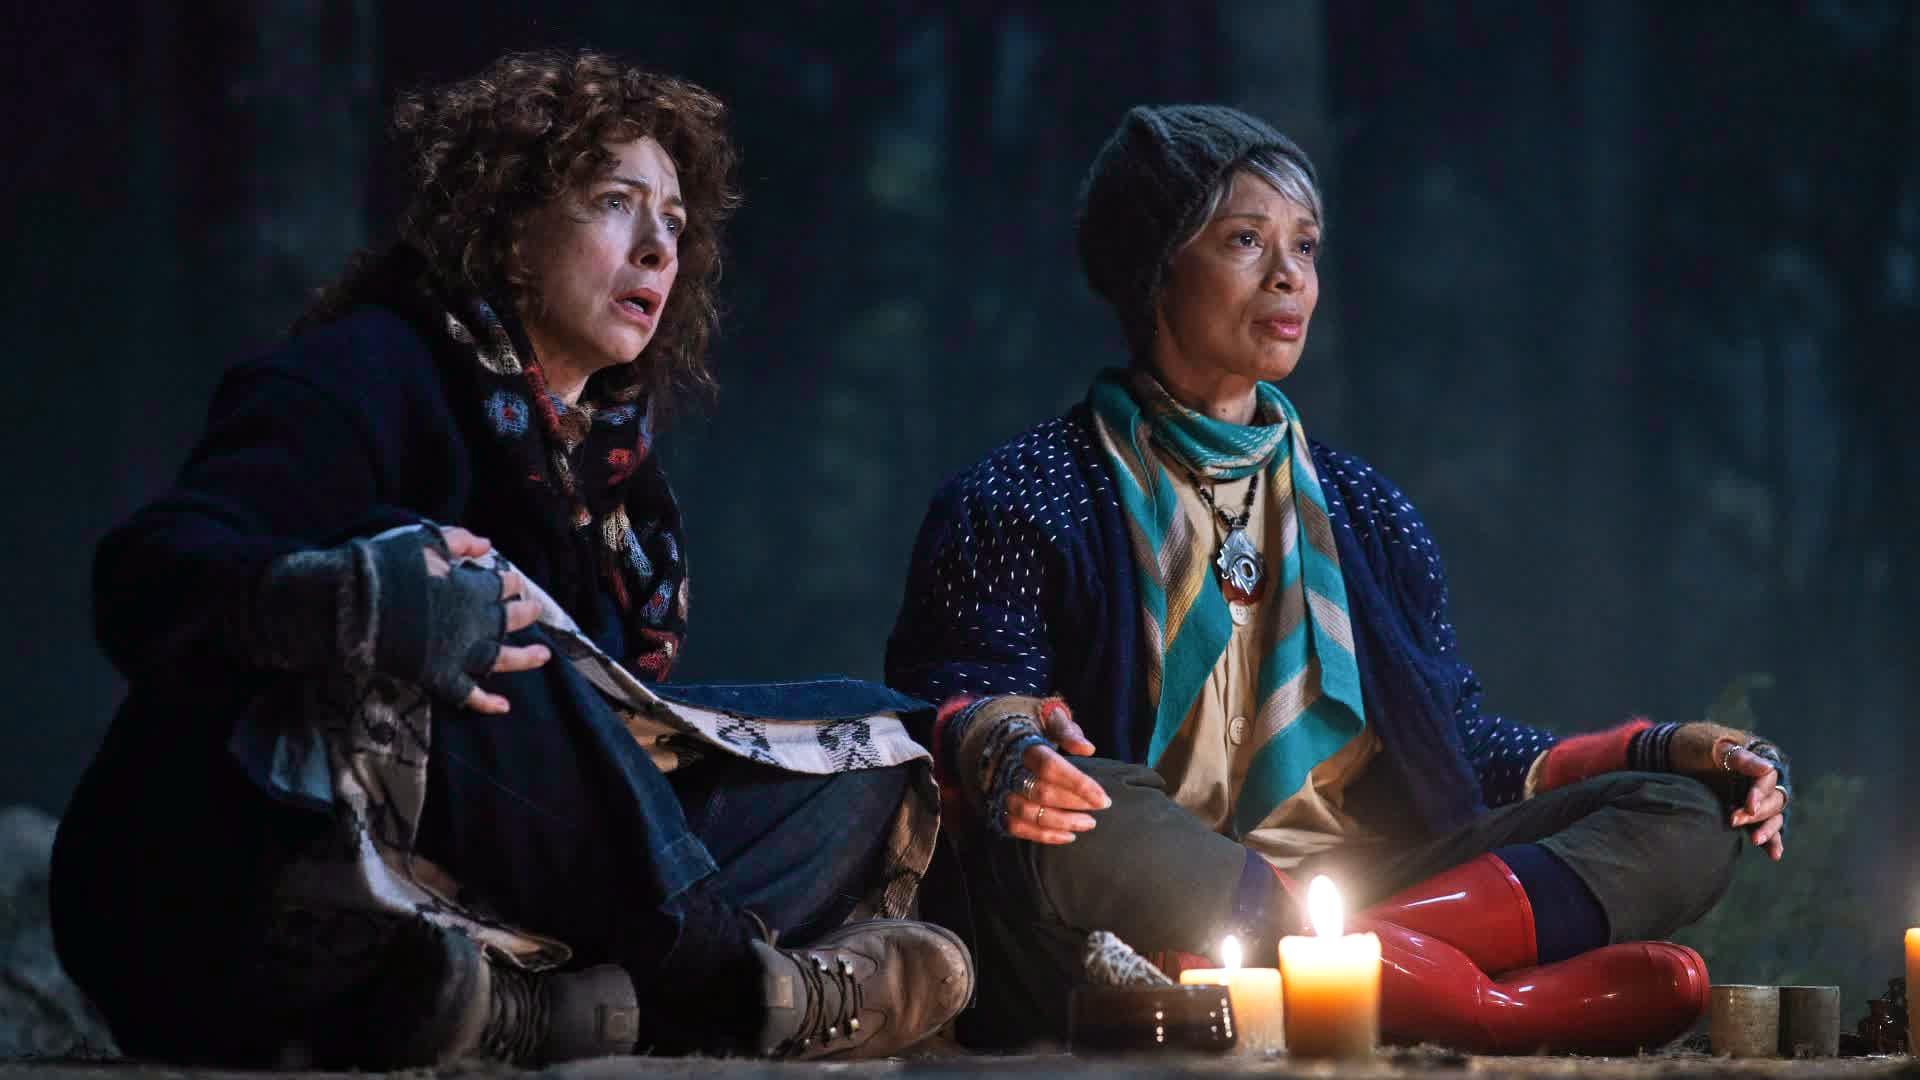 A Discovery of Witches (S02E08): Series 2, Episode 8 Summary - Season 2